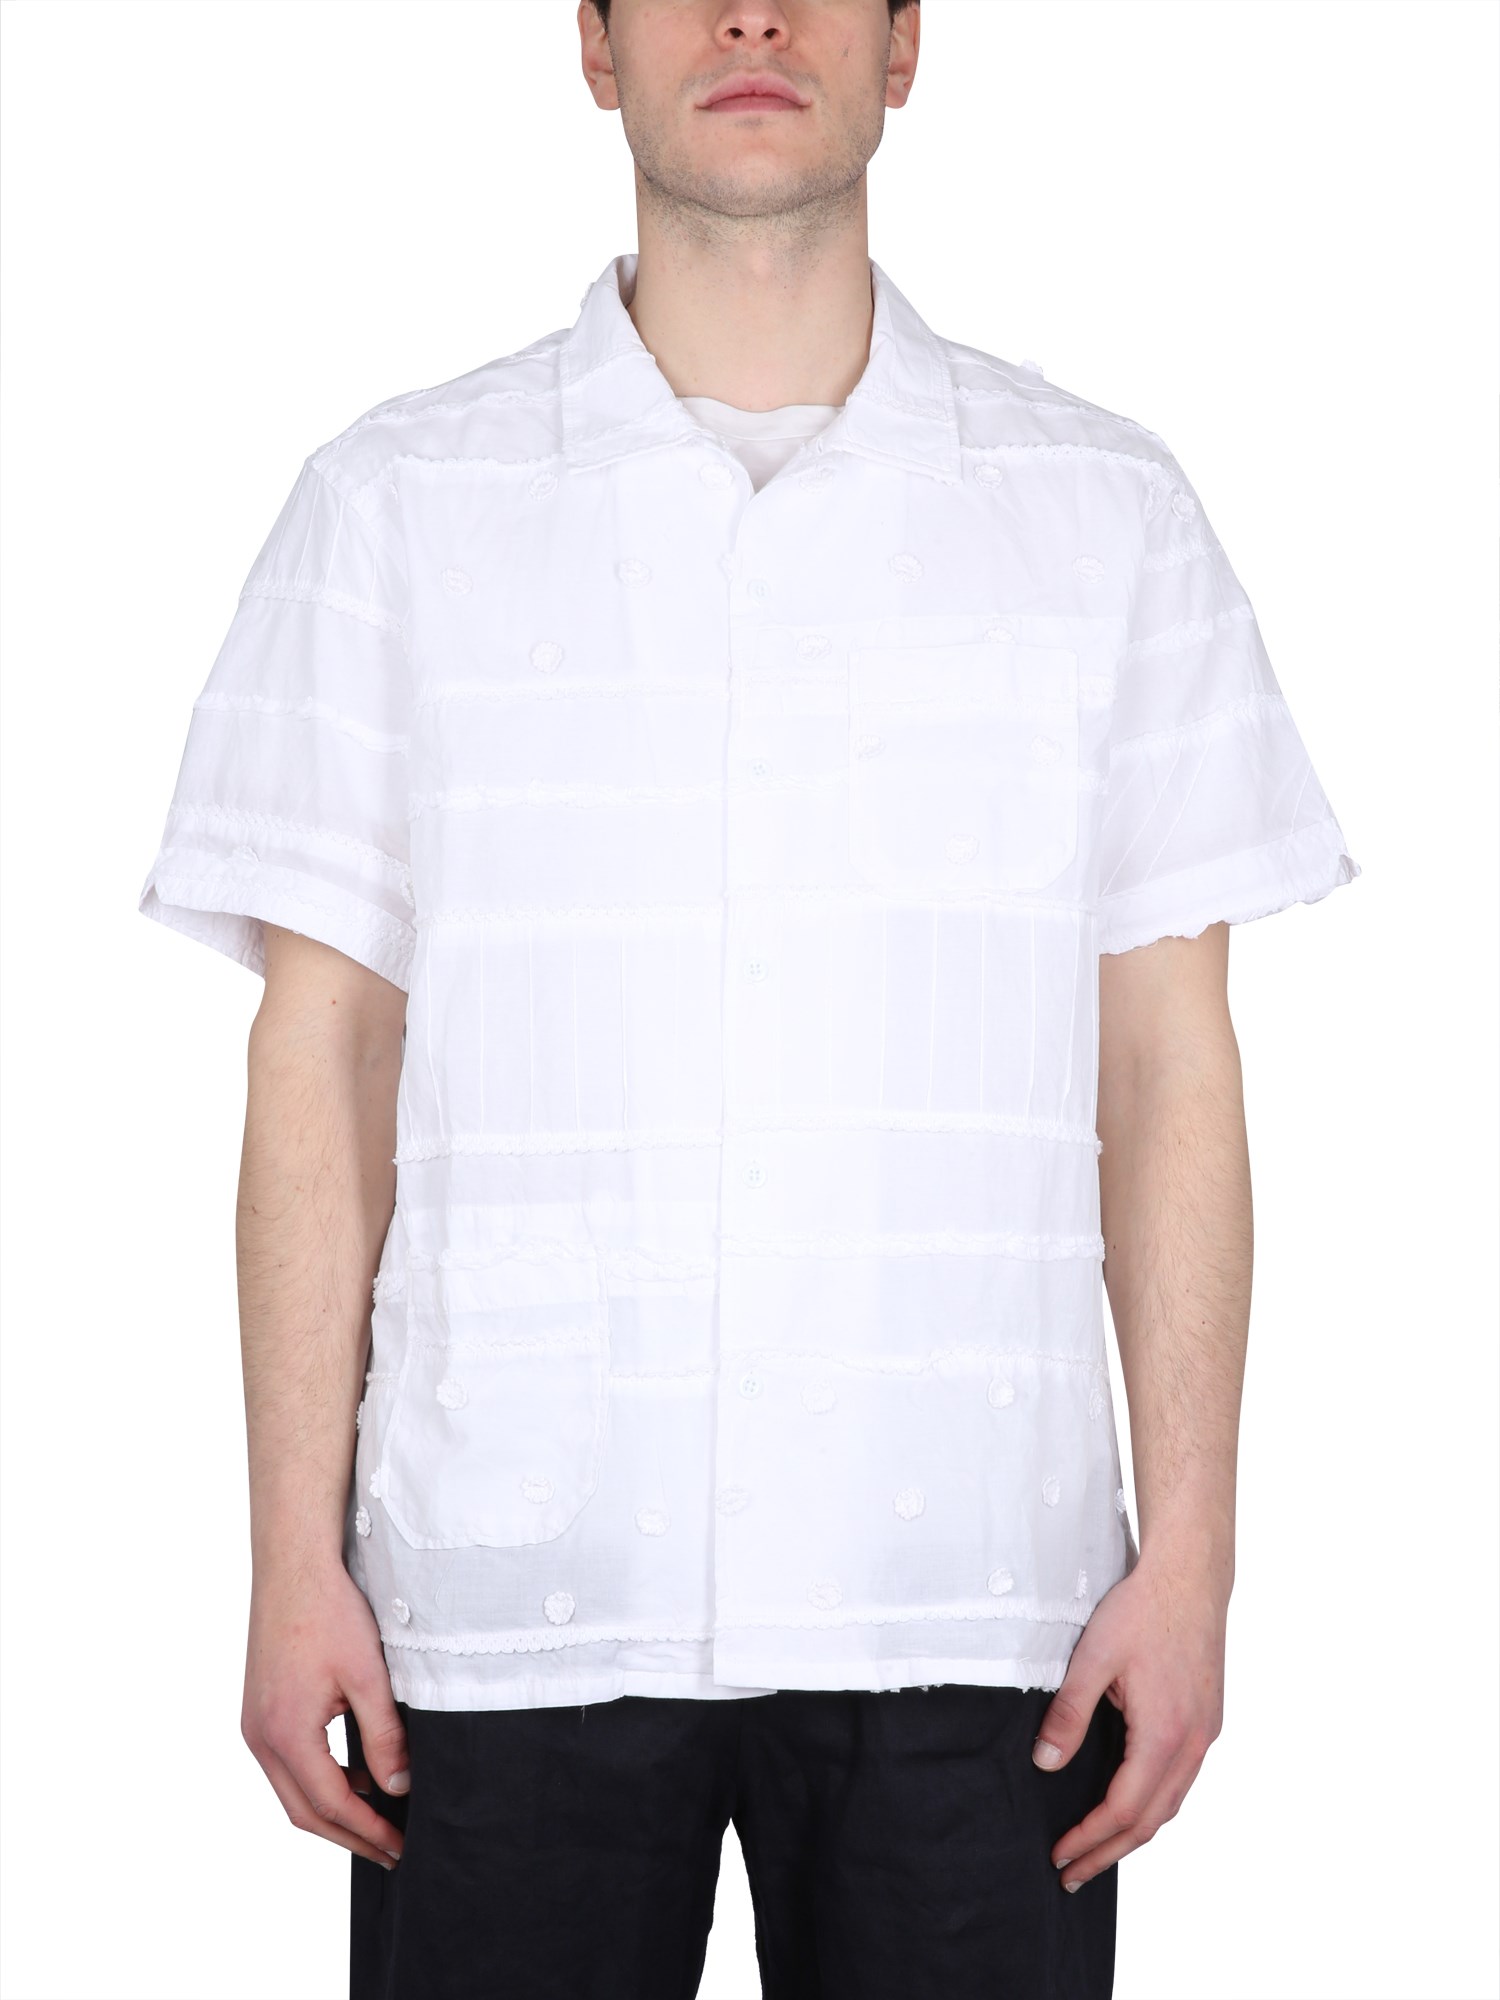 engineered garments shirt with embroidery